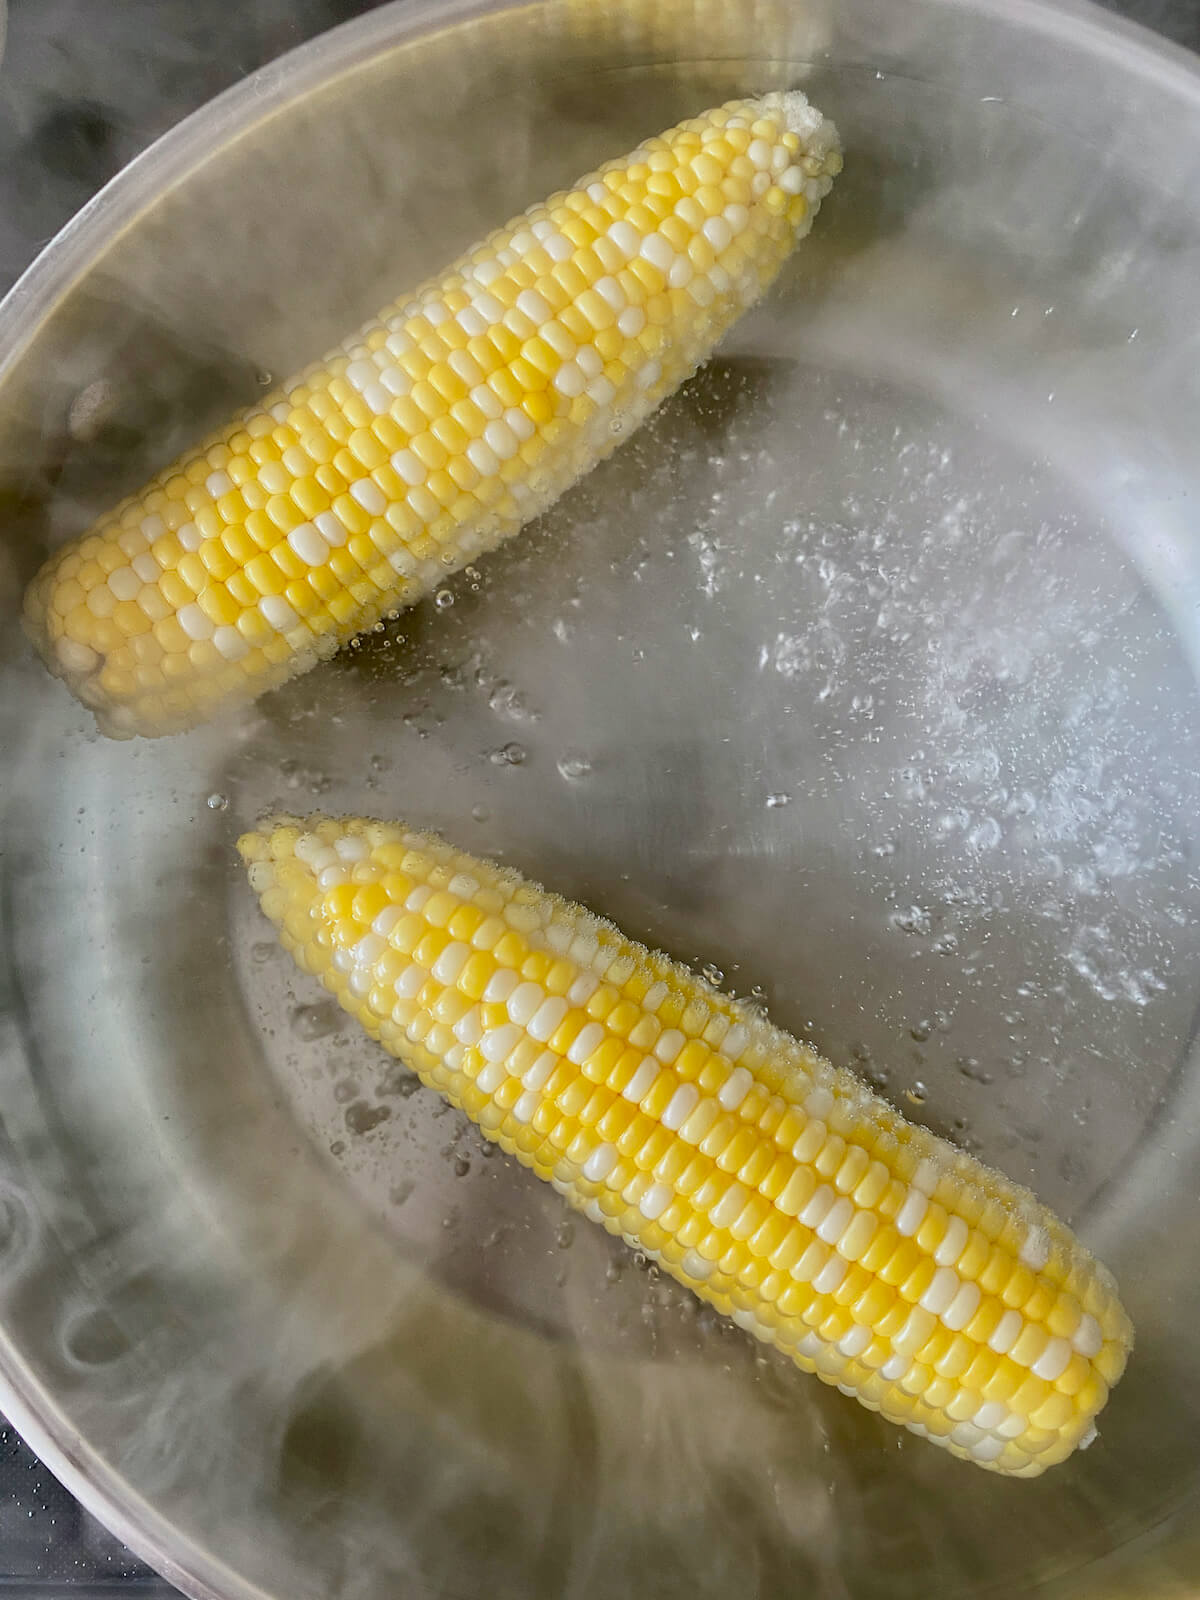 Two ears of corn cooking in a boiling pot of water.